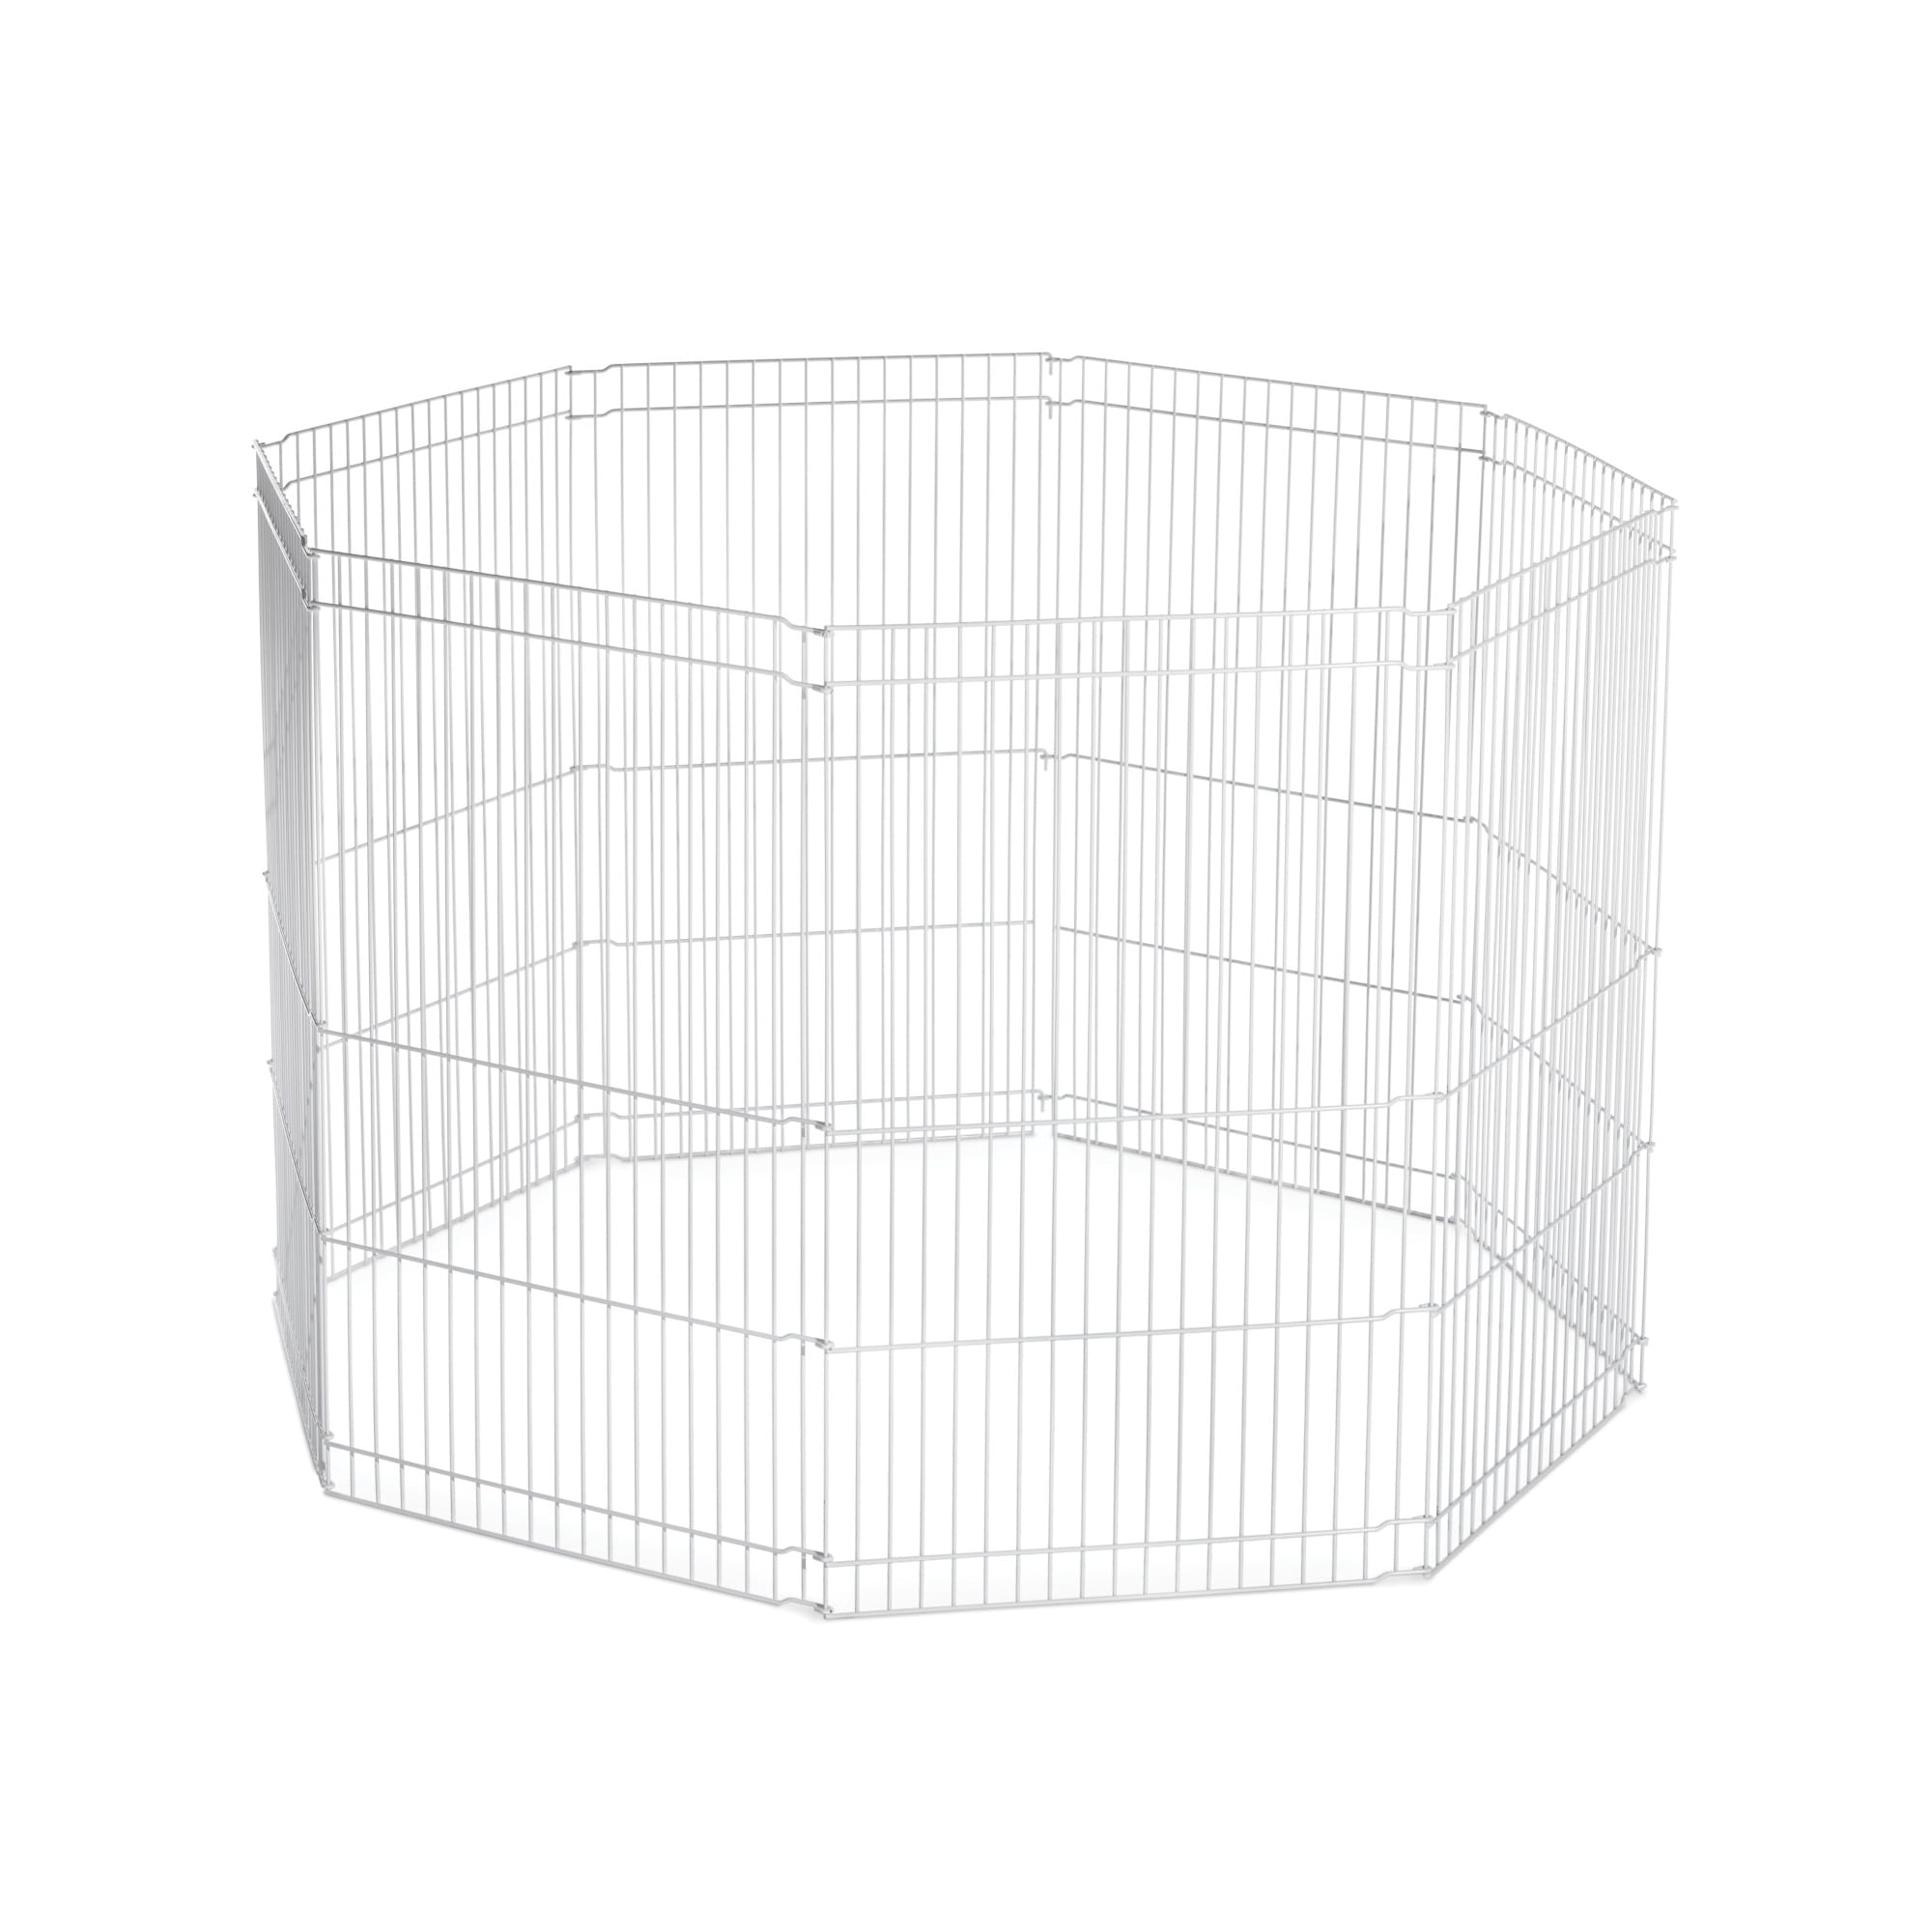 Photos - Rodent Cage / House Prevue Pet Products 8-Panel Ferret Exercise Pen, 18 IN 